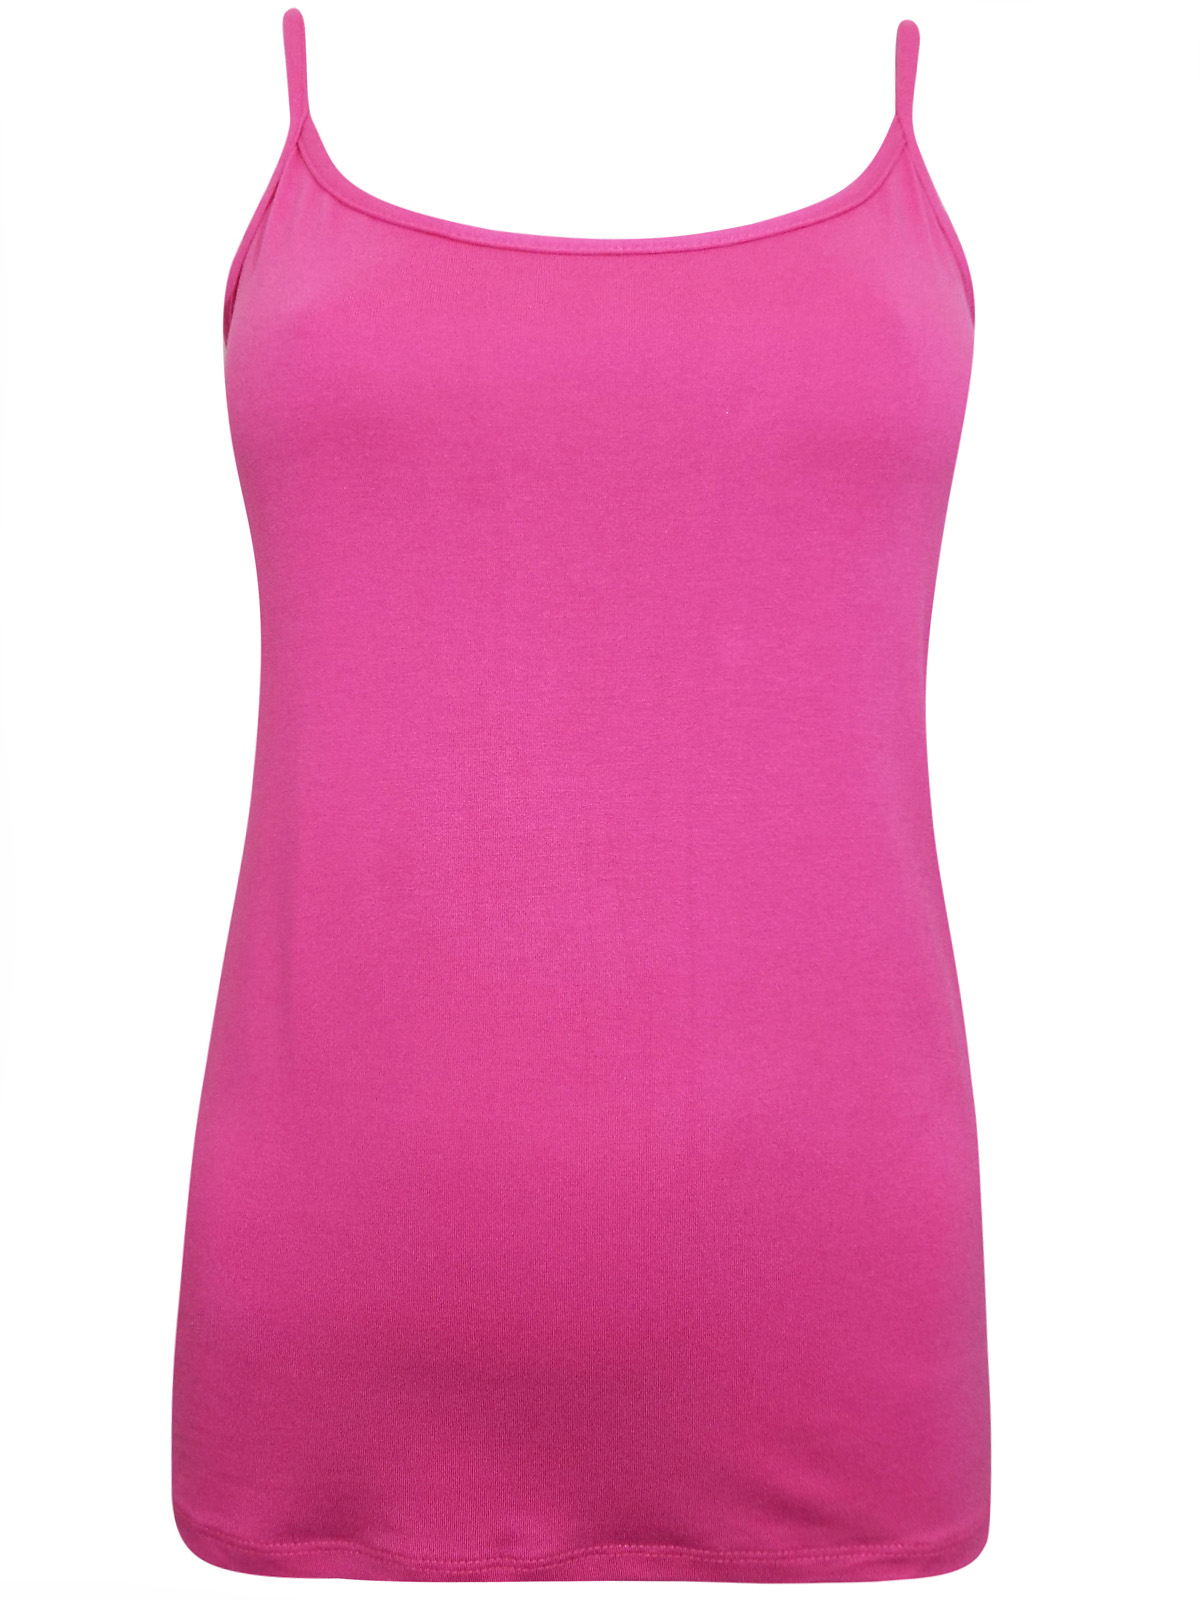 First Avenue PINK Jersey Cami Vest Top - Size 10 to 20